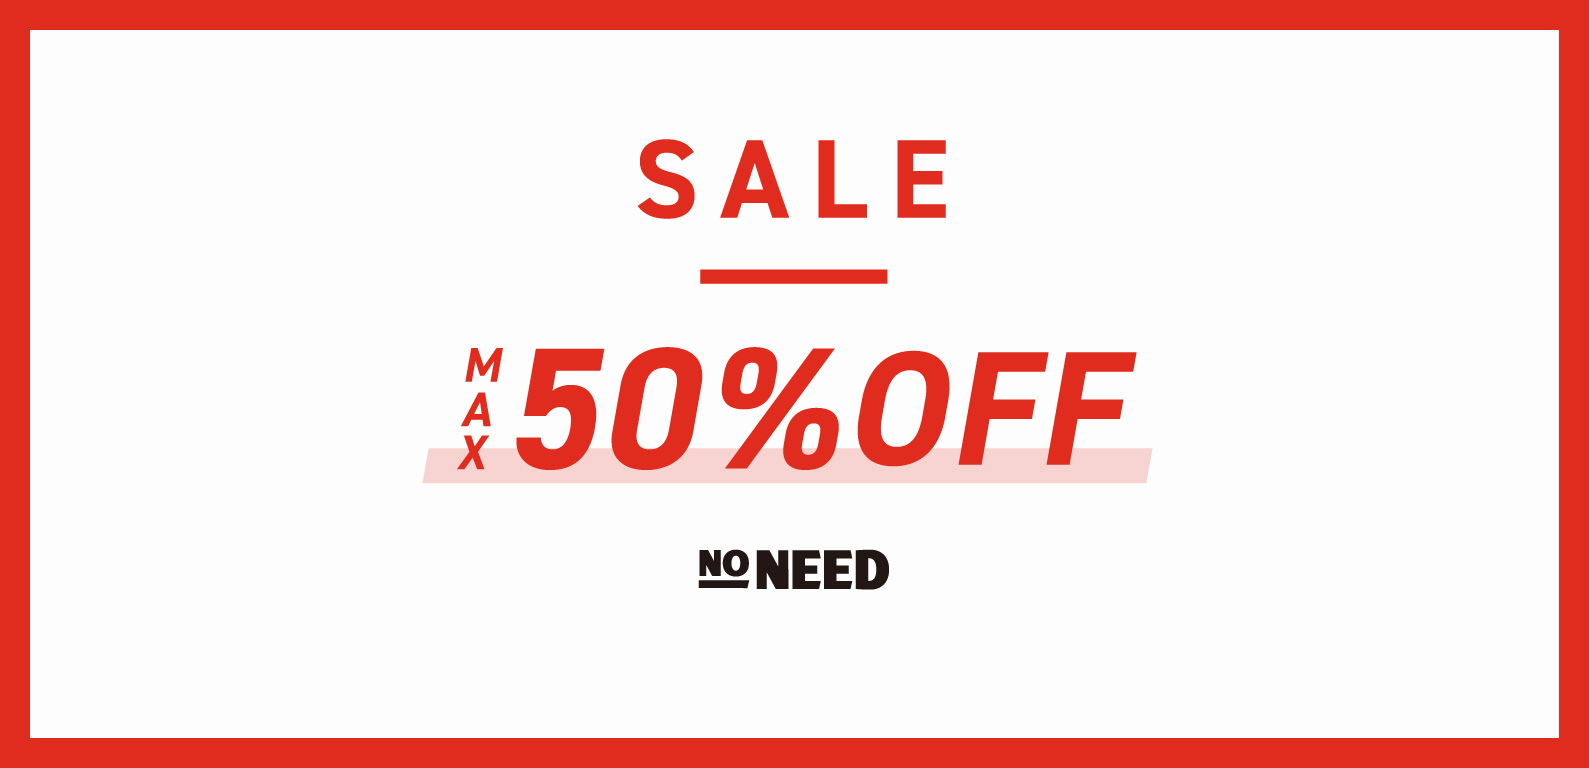 NONEED | SALE